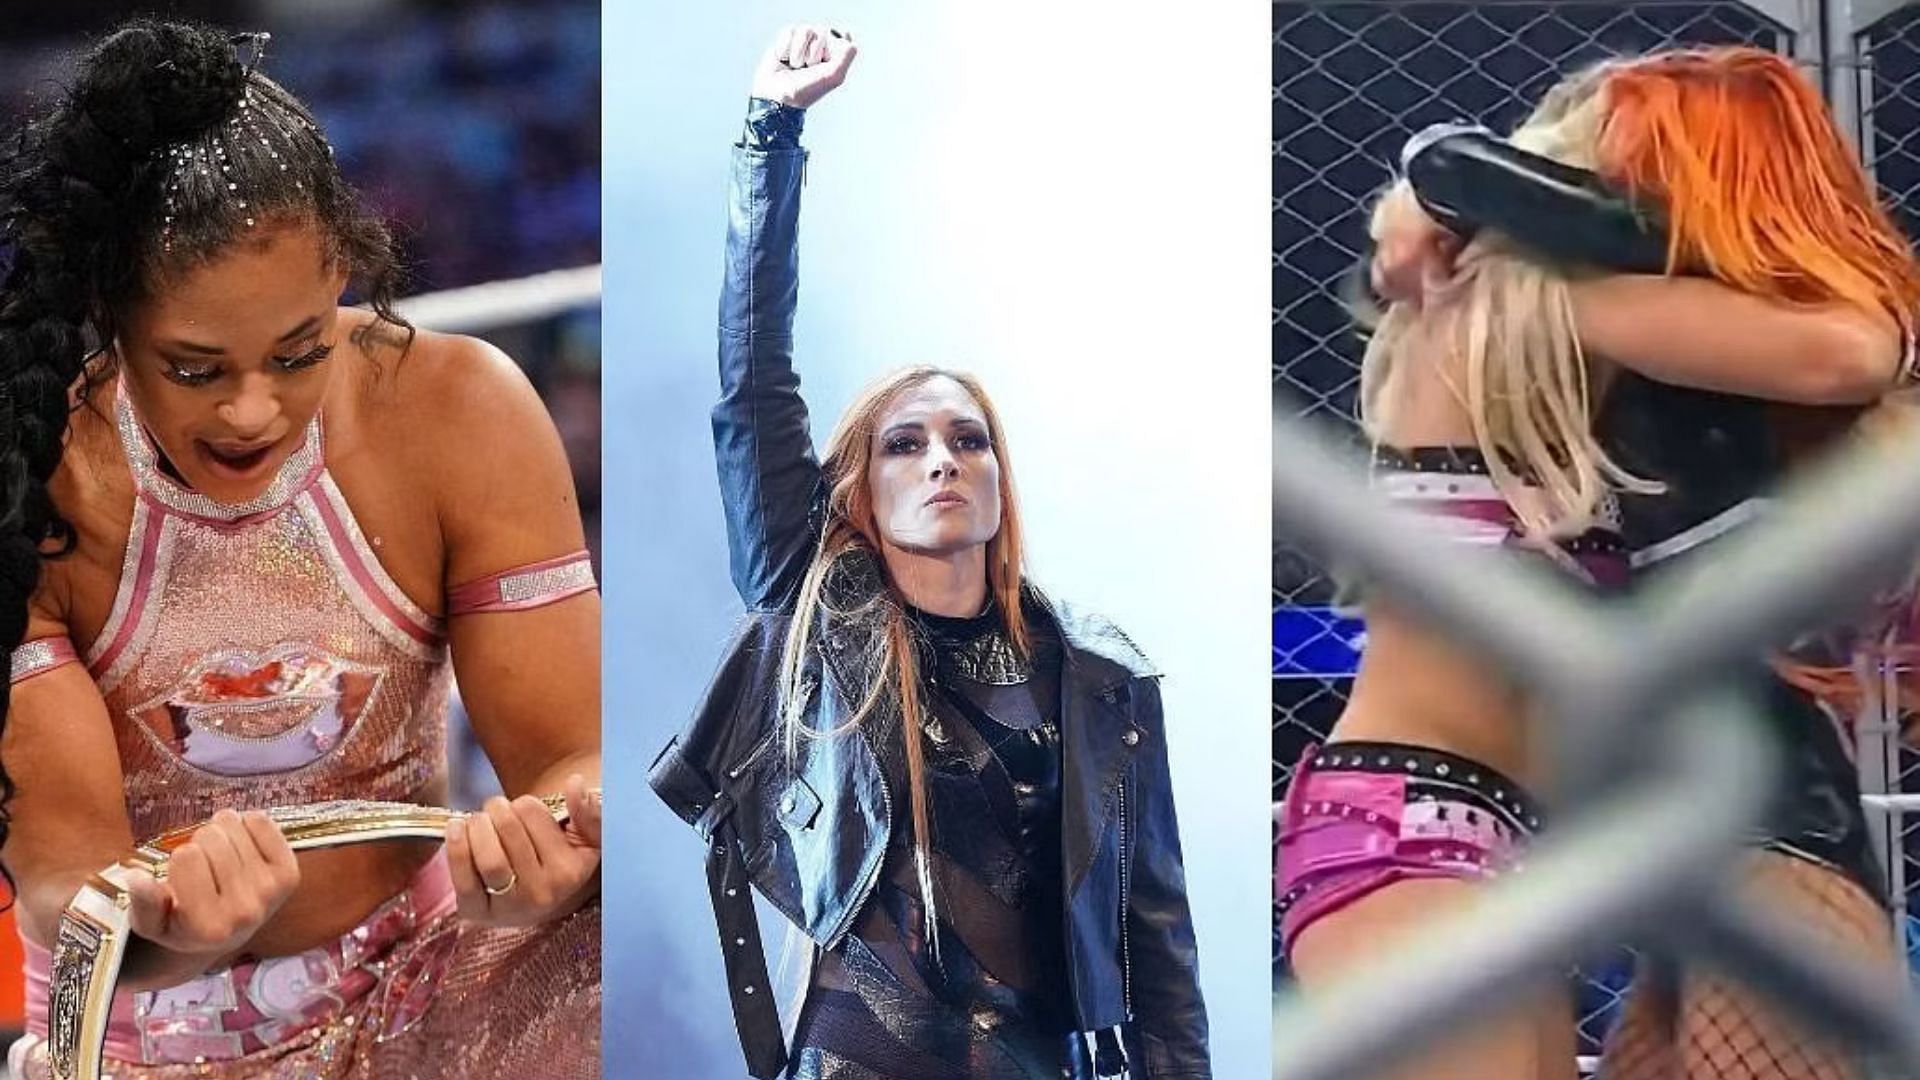 Becky Lynch is currently on a hiatus from WWE.